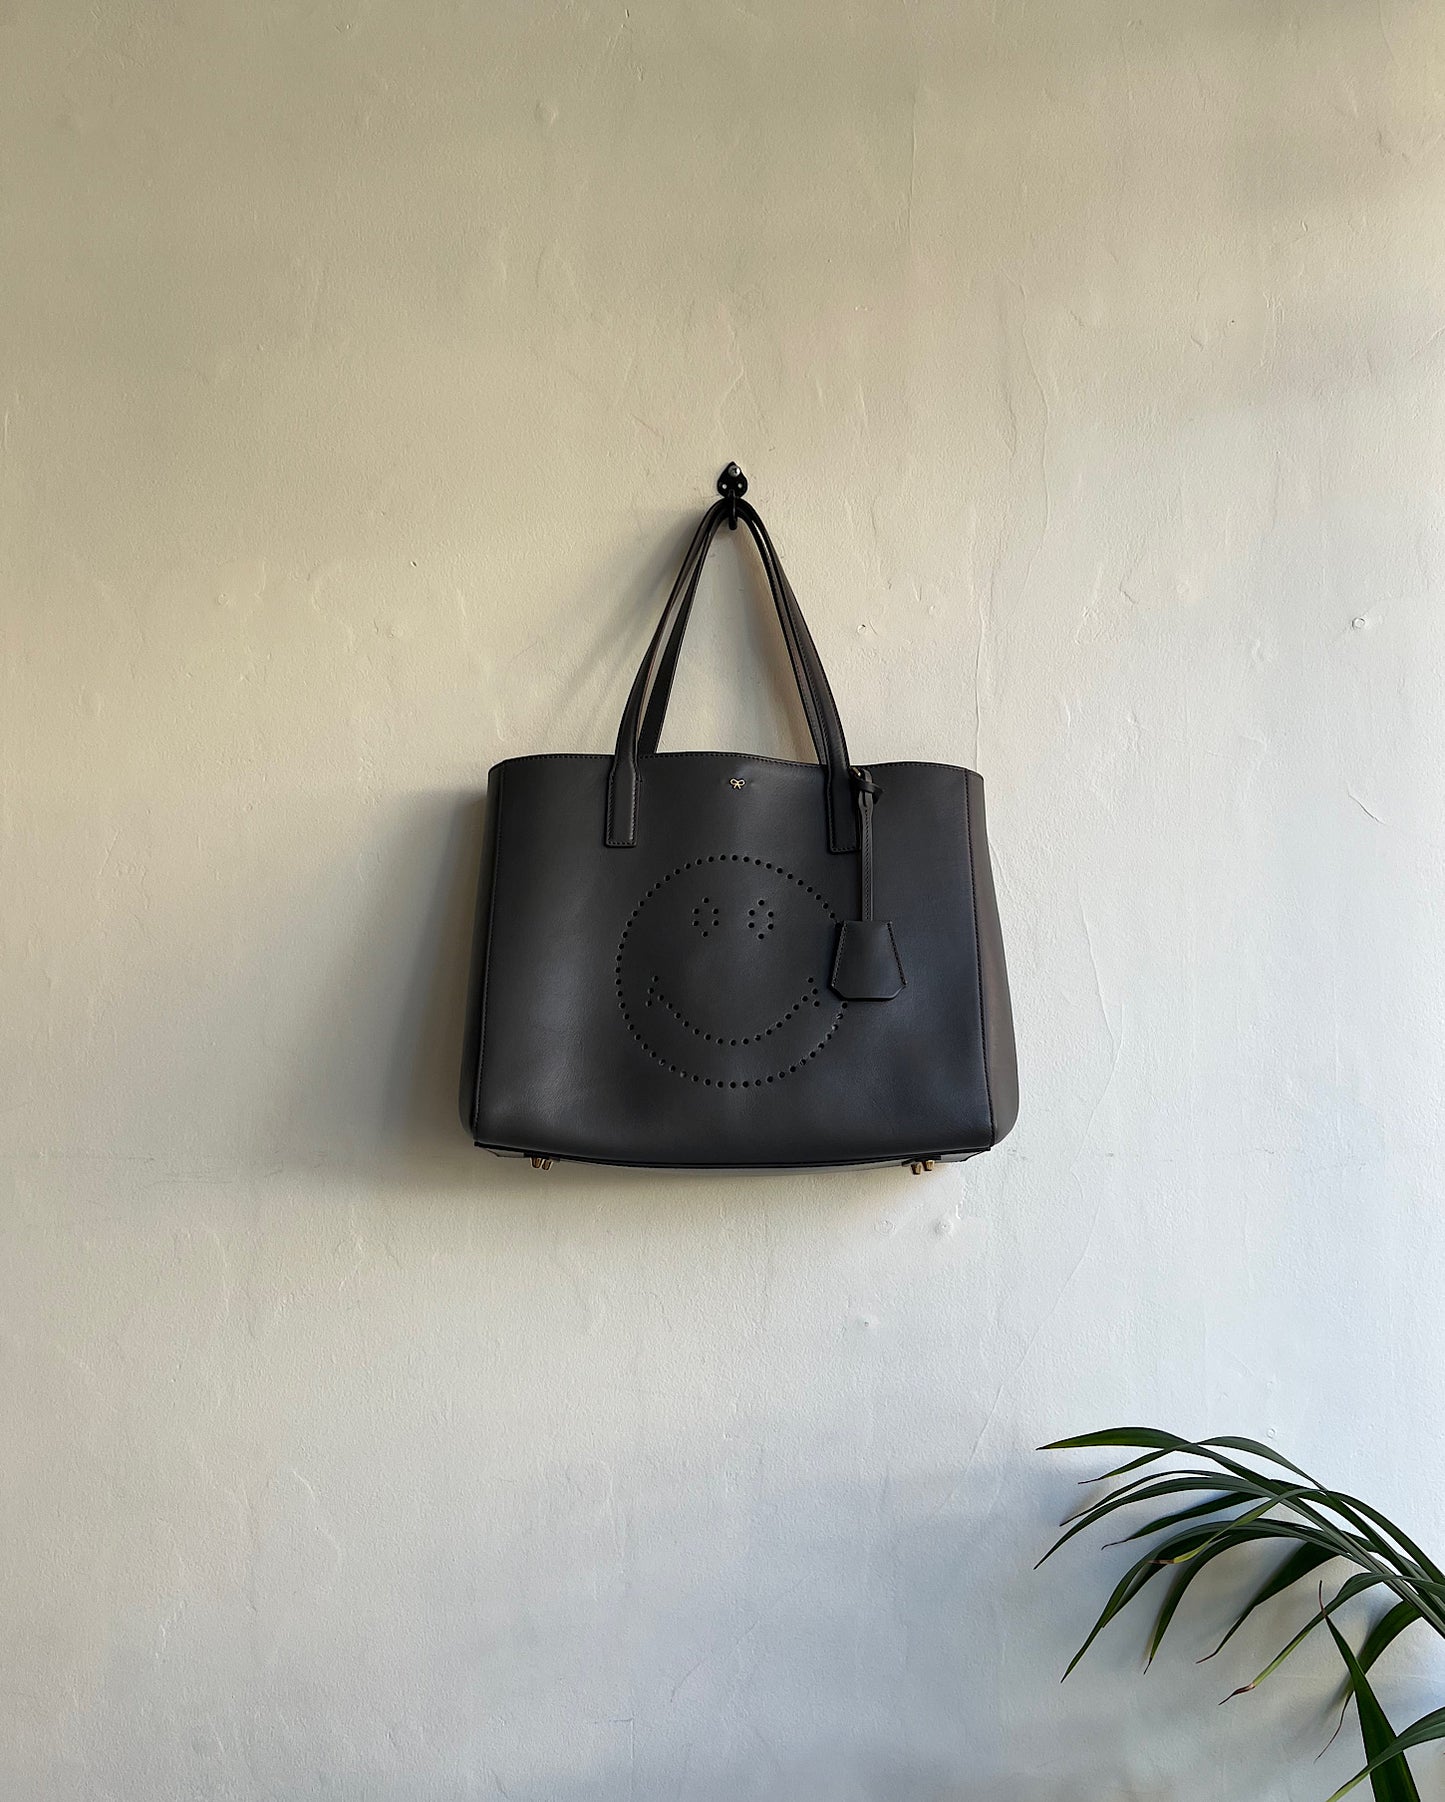 SALE - Grey Leather Tote